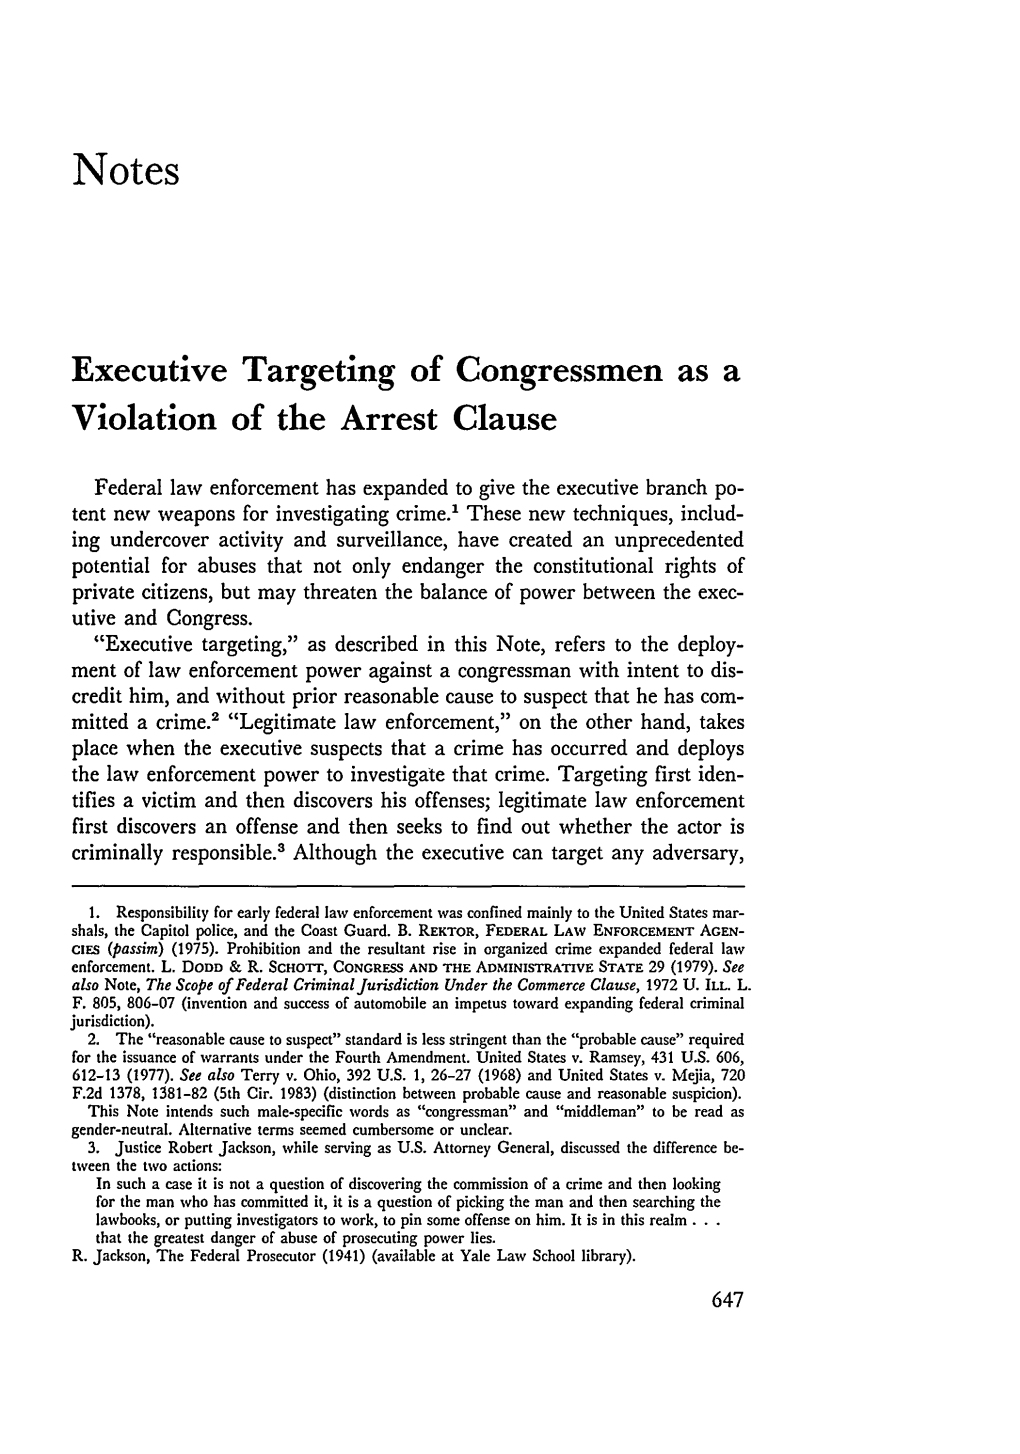 Executive Targeting of Congressmen As a Violation of the Arrest Clause